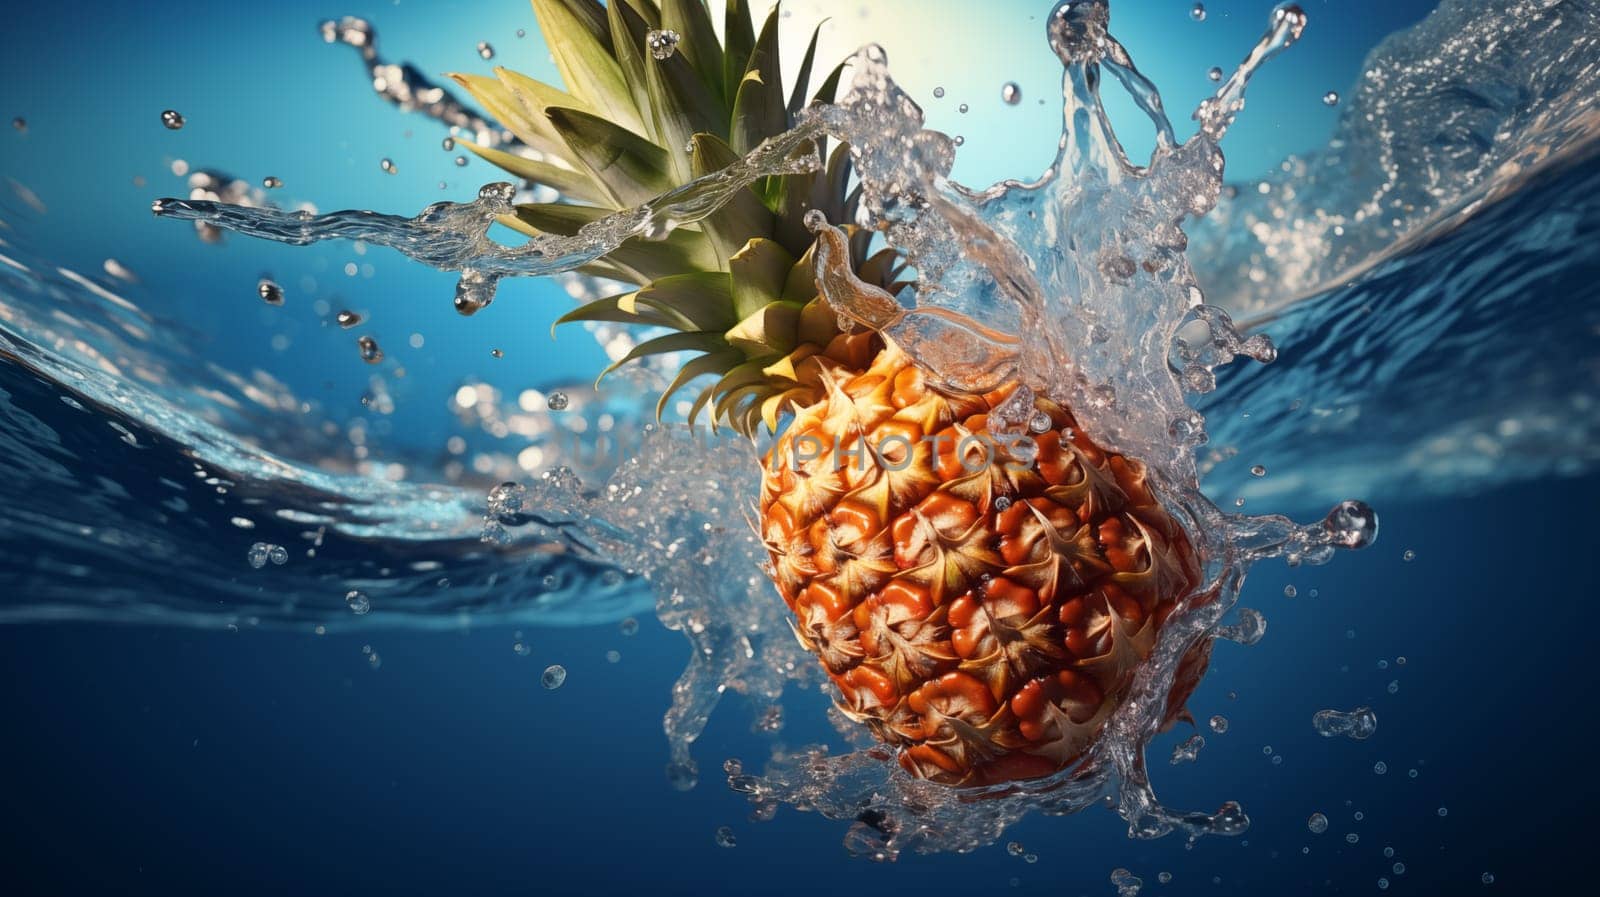 Fresh pineapple falls under blue water, with splashes and air bubbles by Zakharova